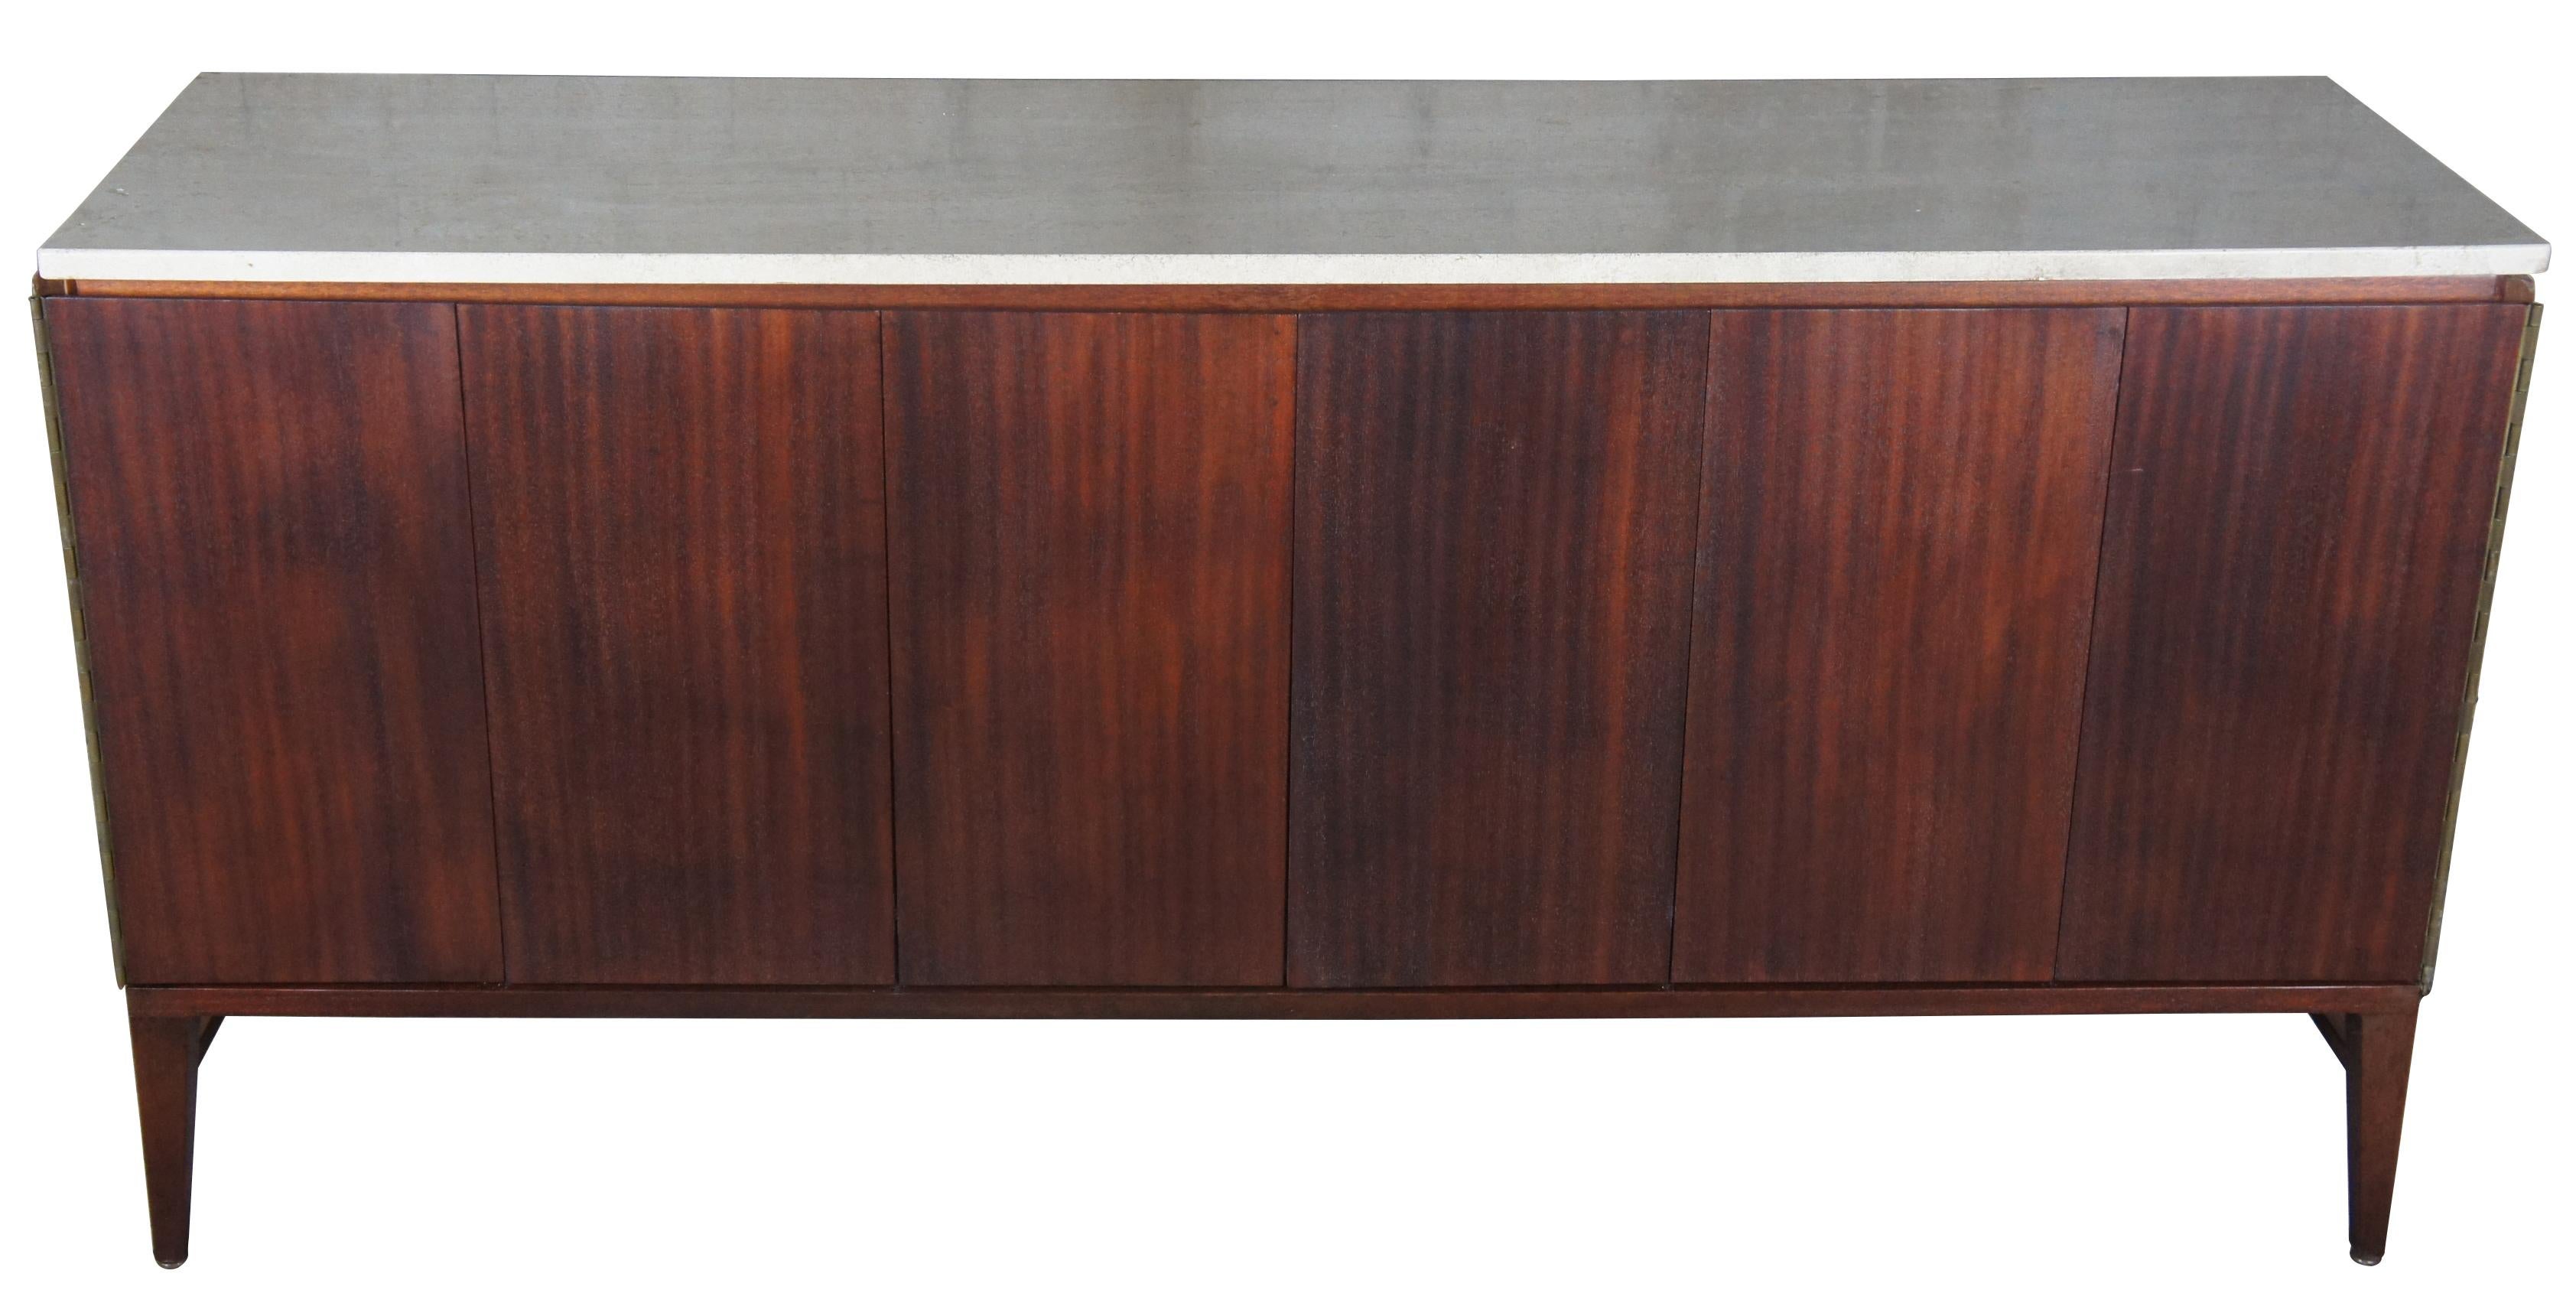 Paul McCobb Calvin Irwin directional sideboard rosewood Mid-Century Modern MCM

Rosewood buffet / sideboard / credenza with abelone top; opens to four drawers and two shelves, circa 1960s.